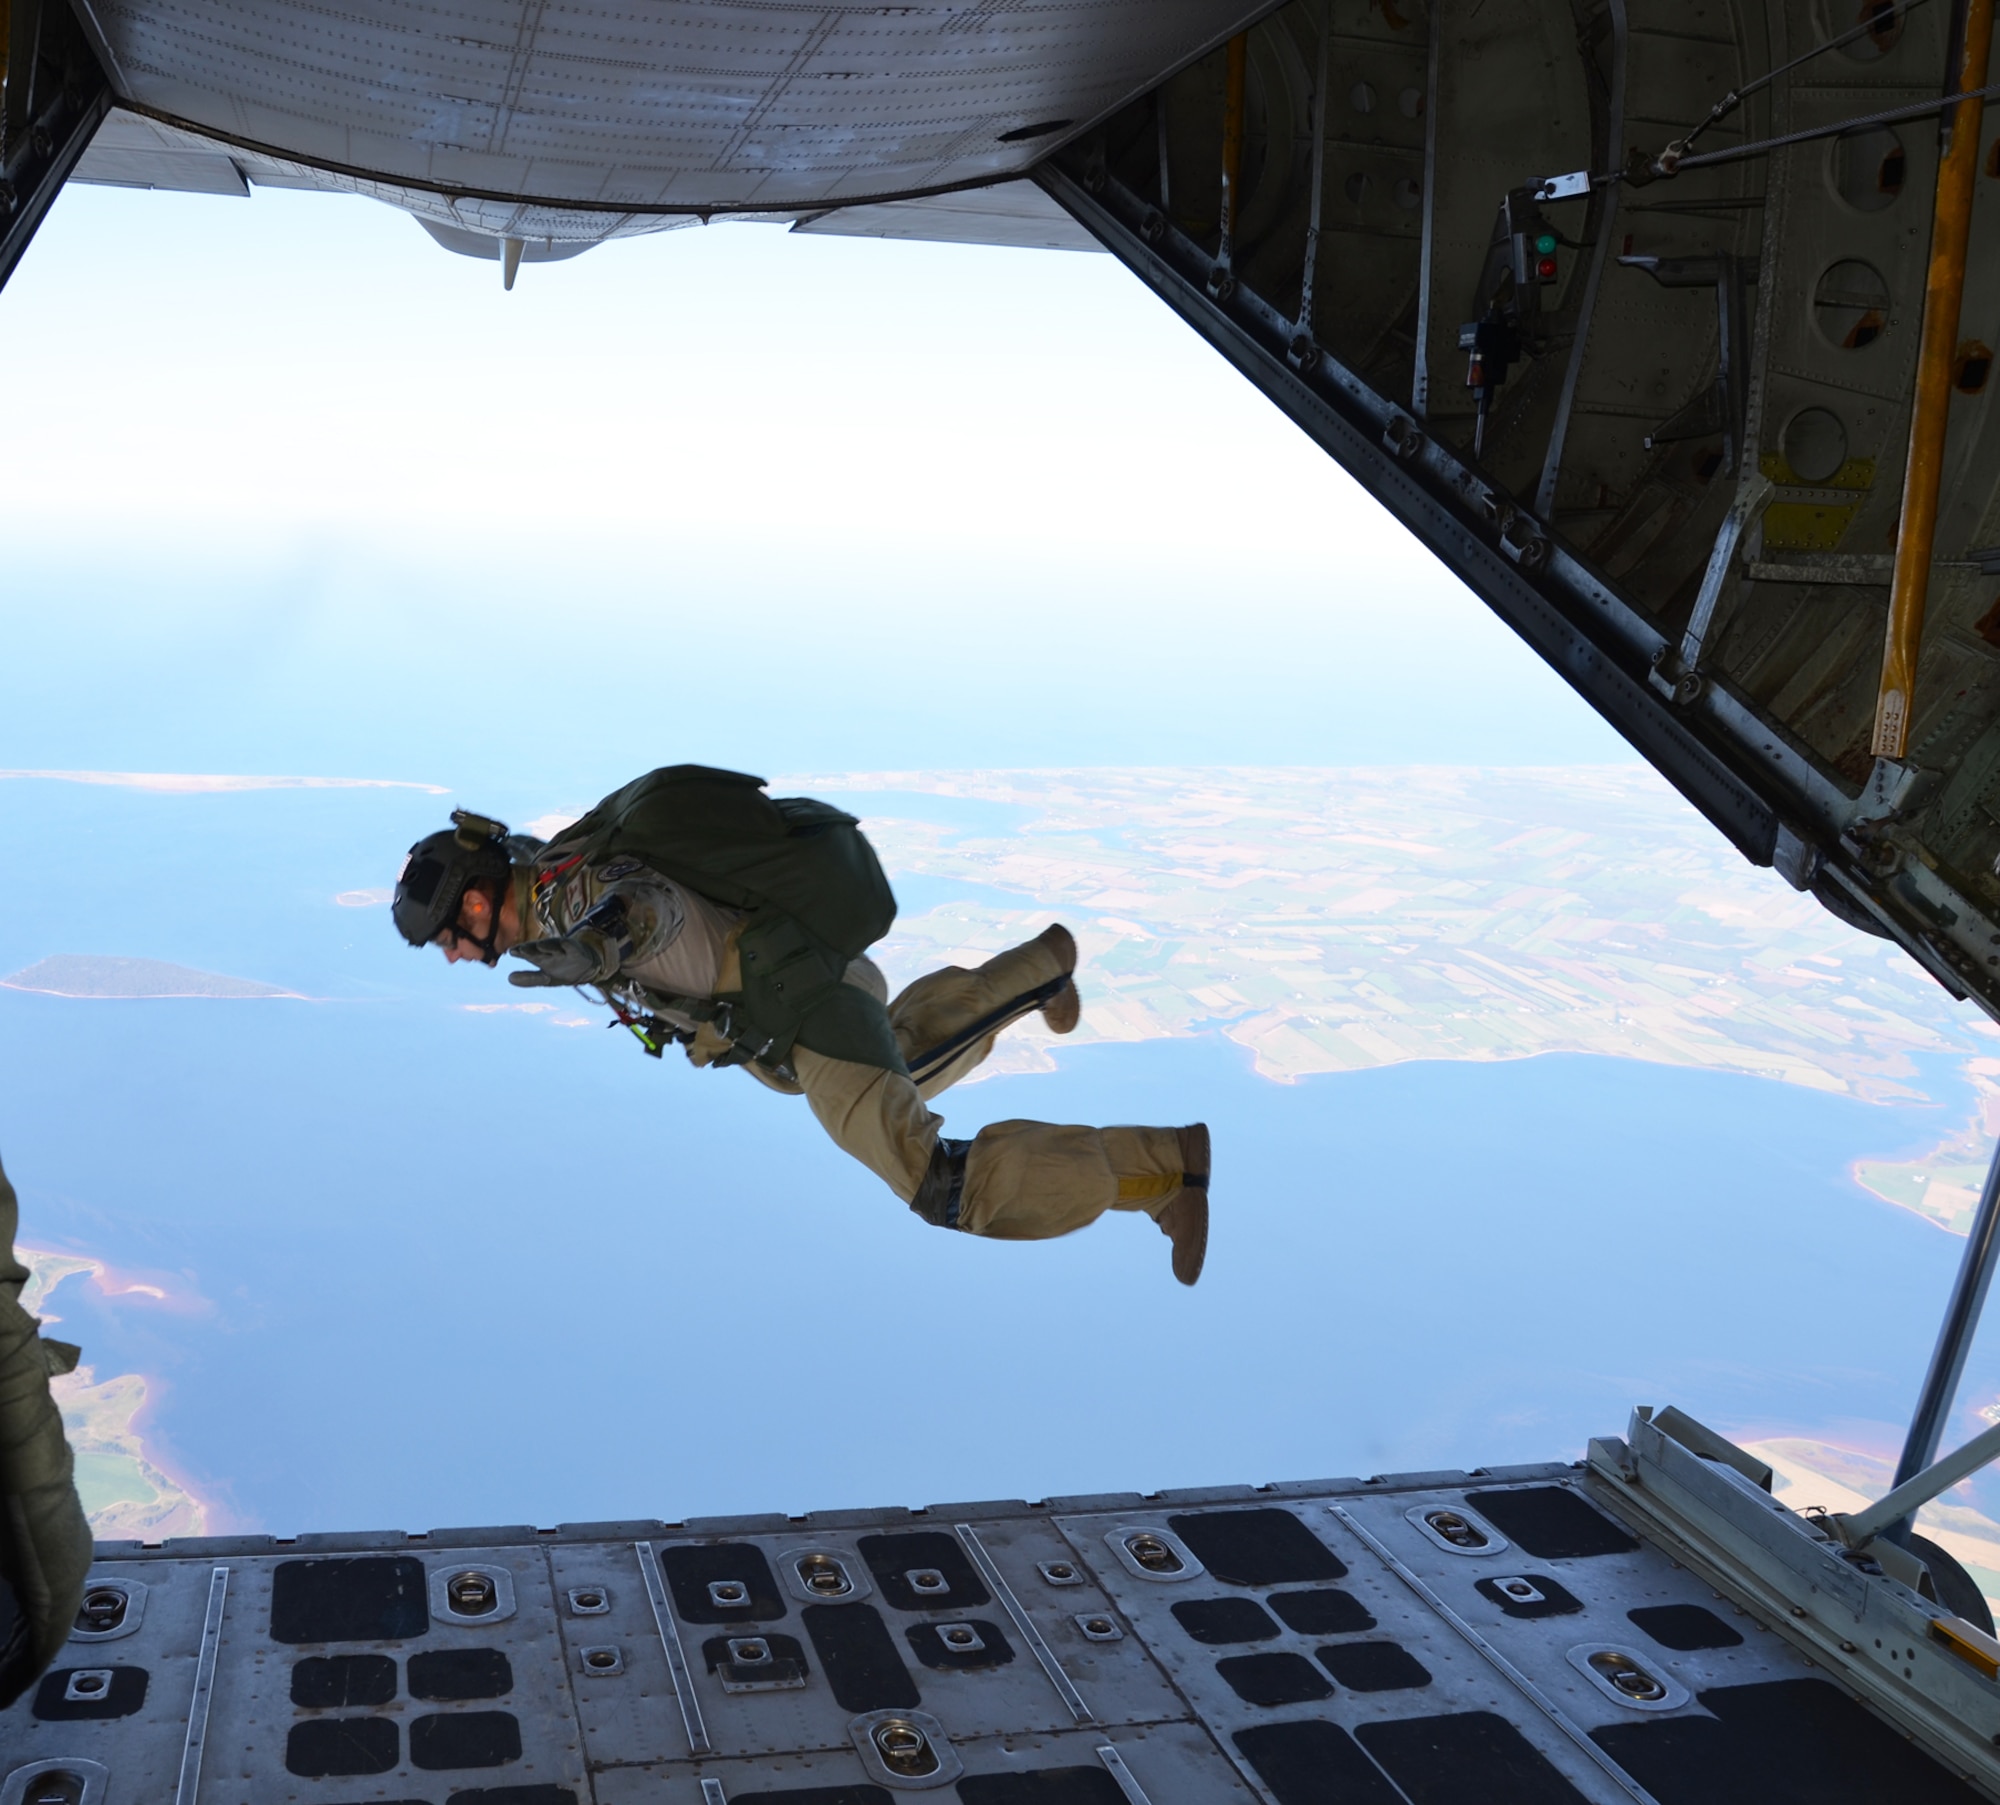 SUMMERSIDE, PRINCE EDWARD ISLAND, Canada - Tech. Sgt. Simon Friedman, 304th Rescue Squadron, Portland Ore. pararescueman, free falls from a WC-130J Hercules aircraft. Friedman was participating in a parachuting accuracy exercise here during the U.S. and Canadian Search and Rescue Exercise (SAREX). (U.S. Air Force photo/Capt. Cathleen Snow)